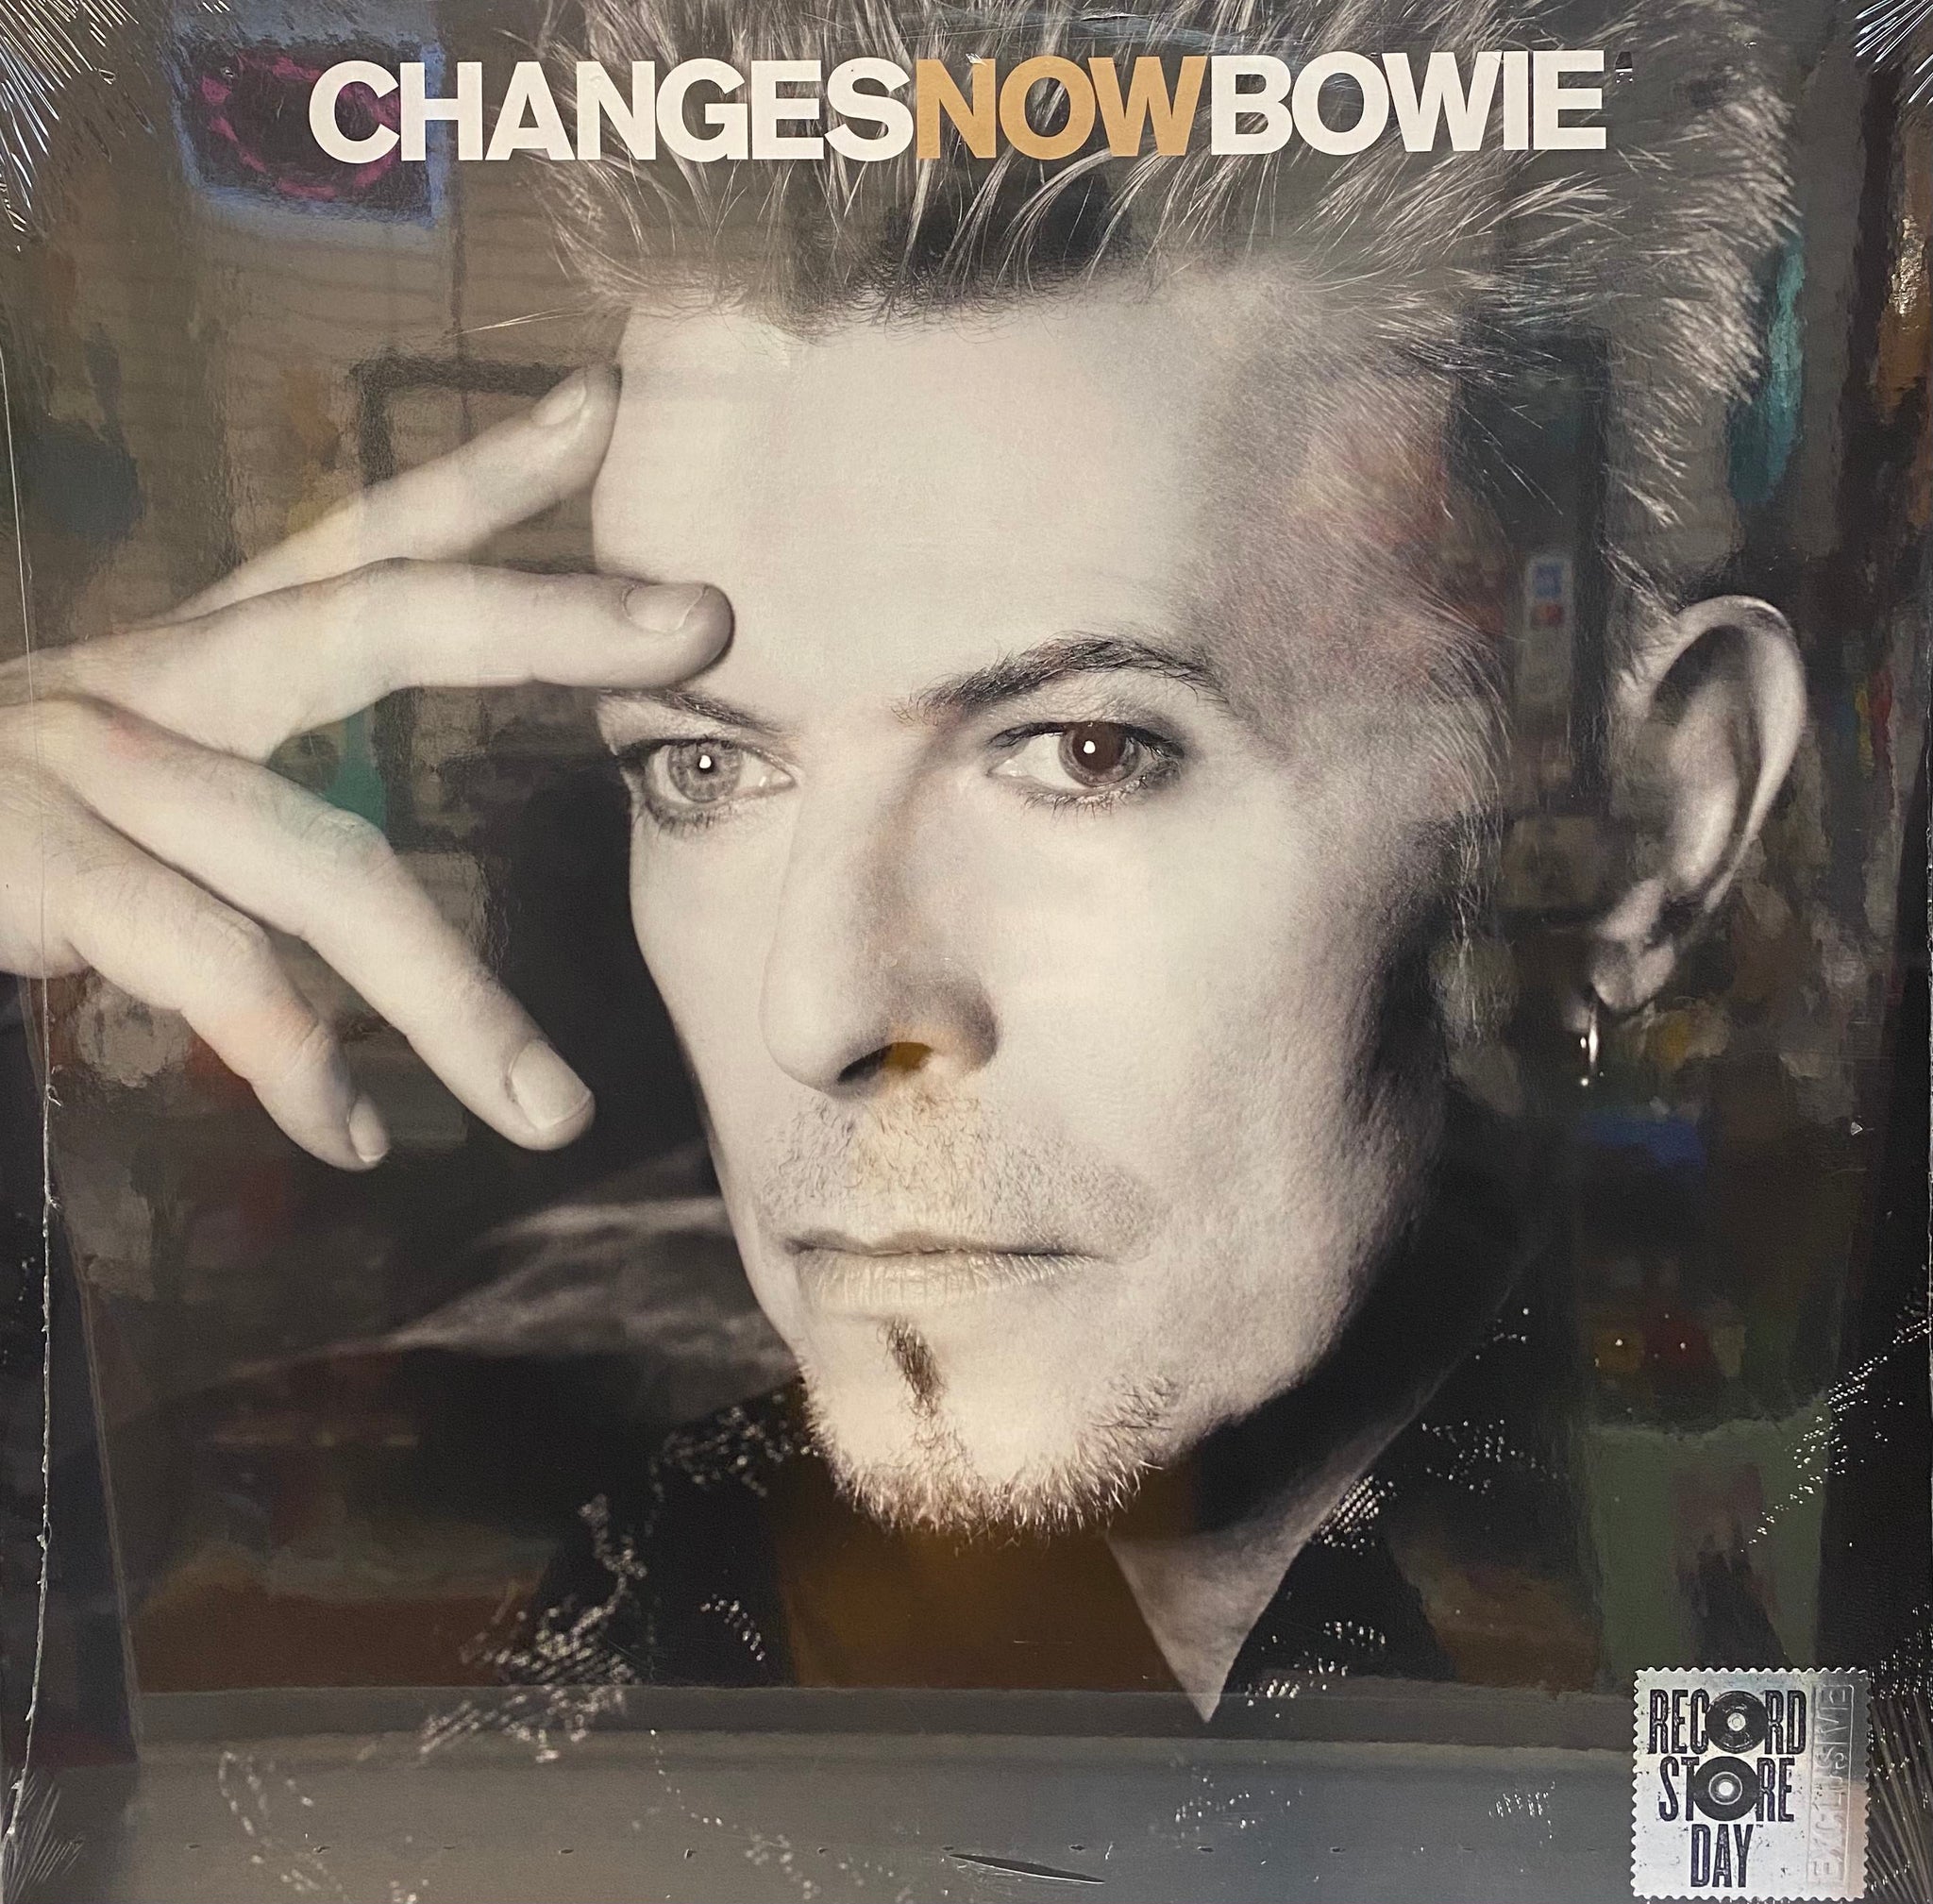 David Bowie - Changes Now - Record Store Day Vinyl LP